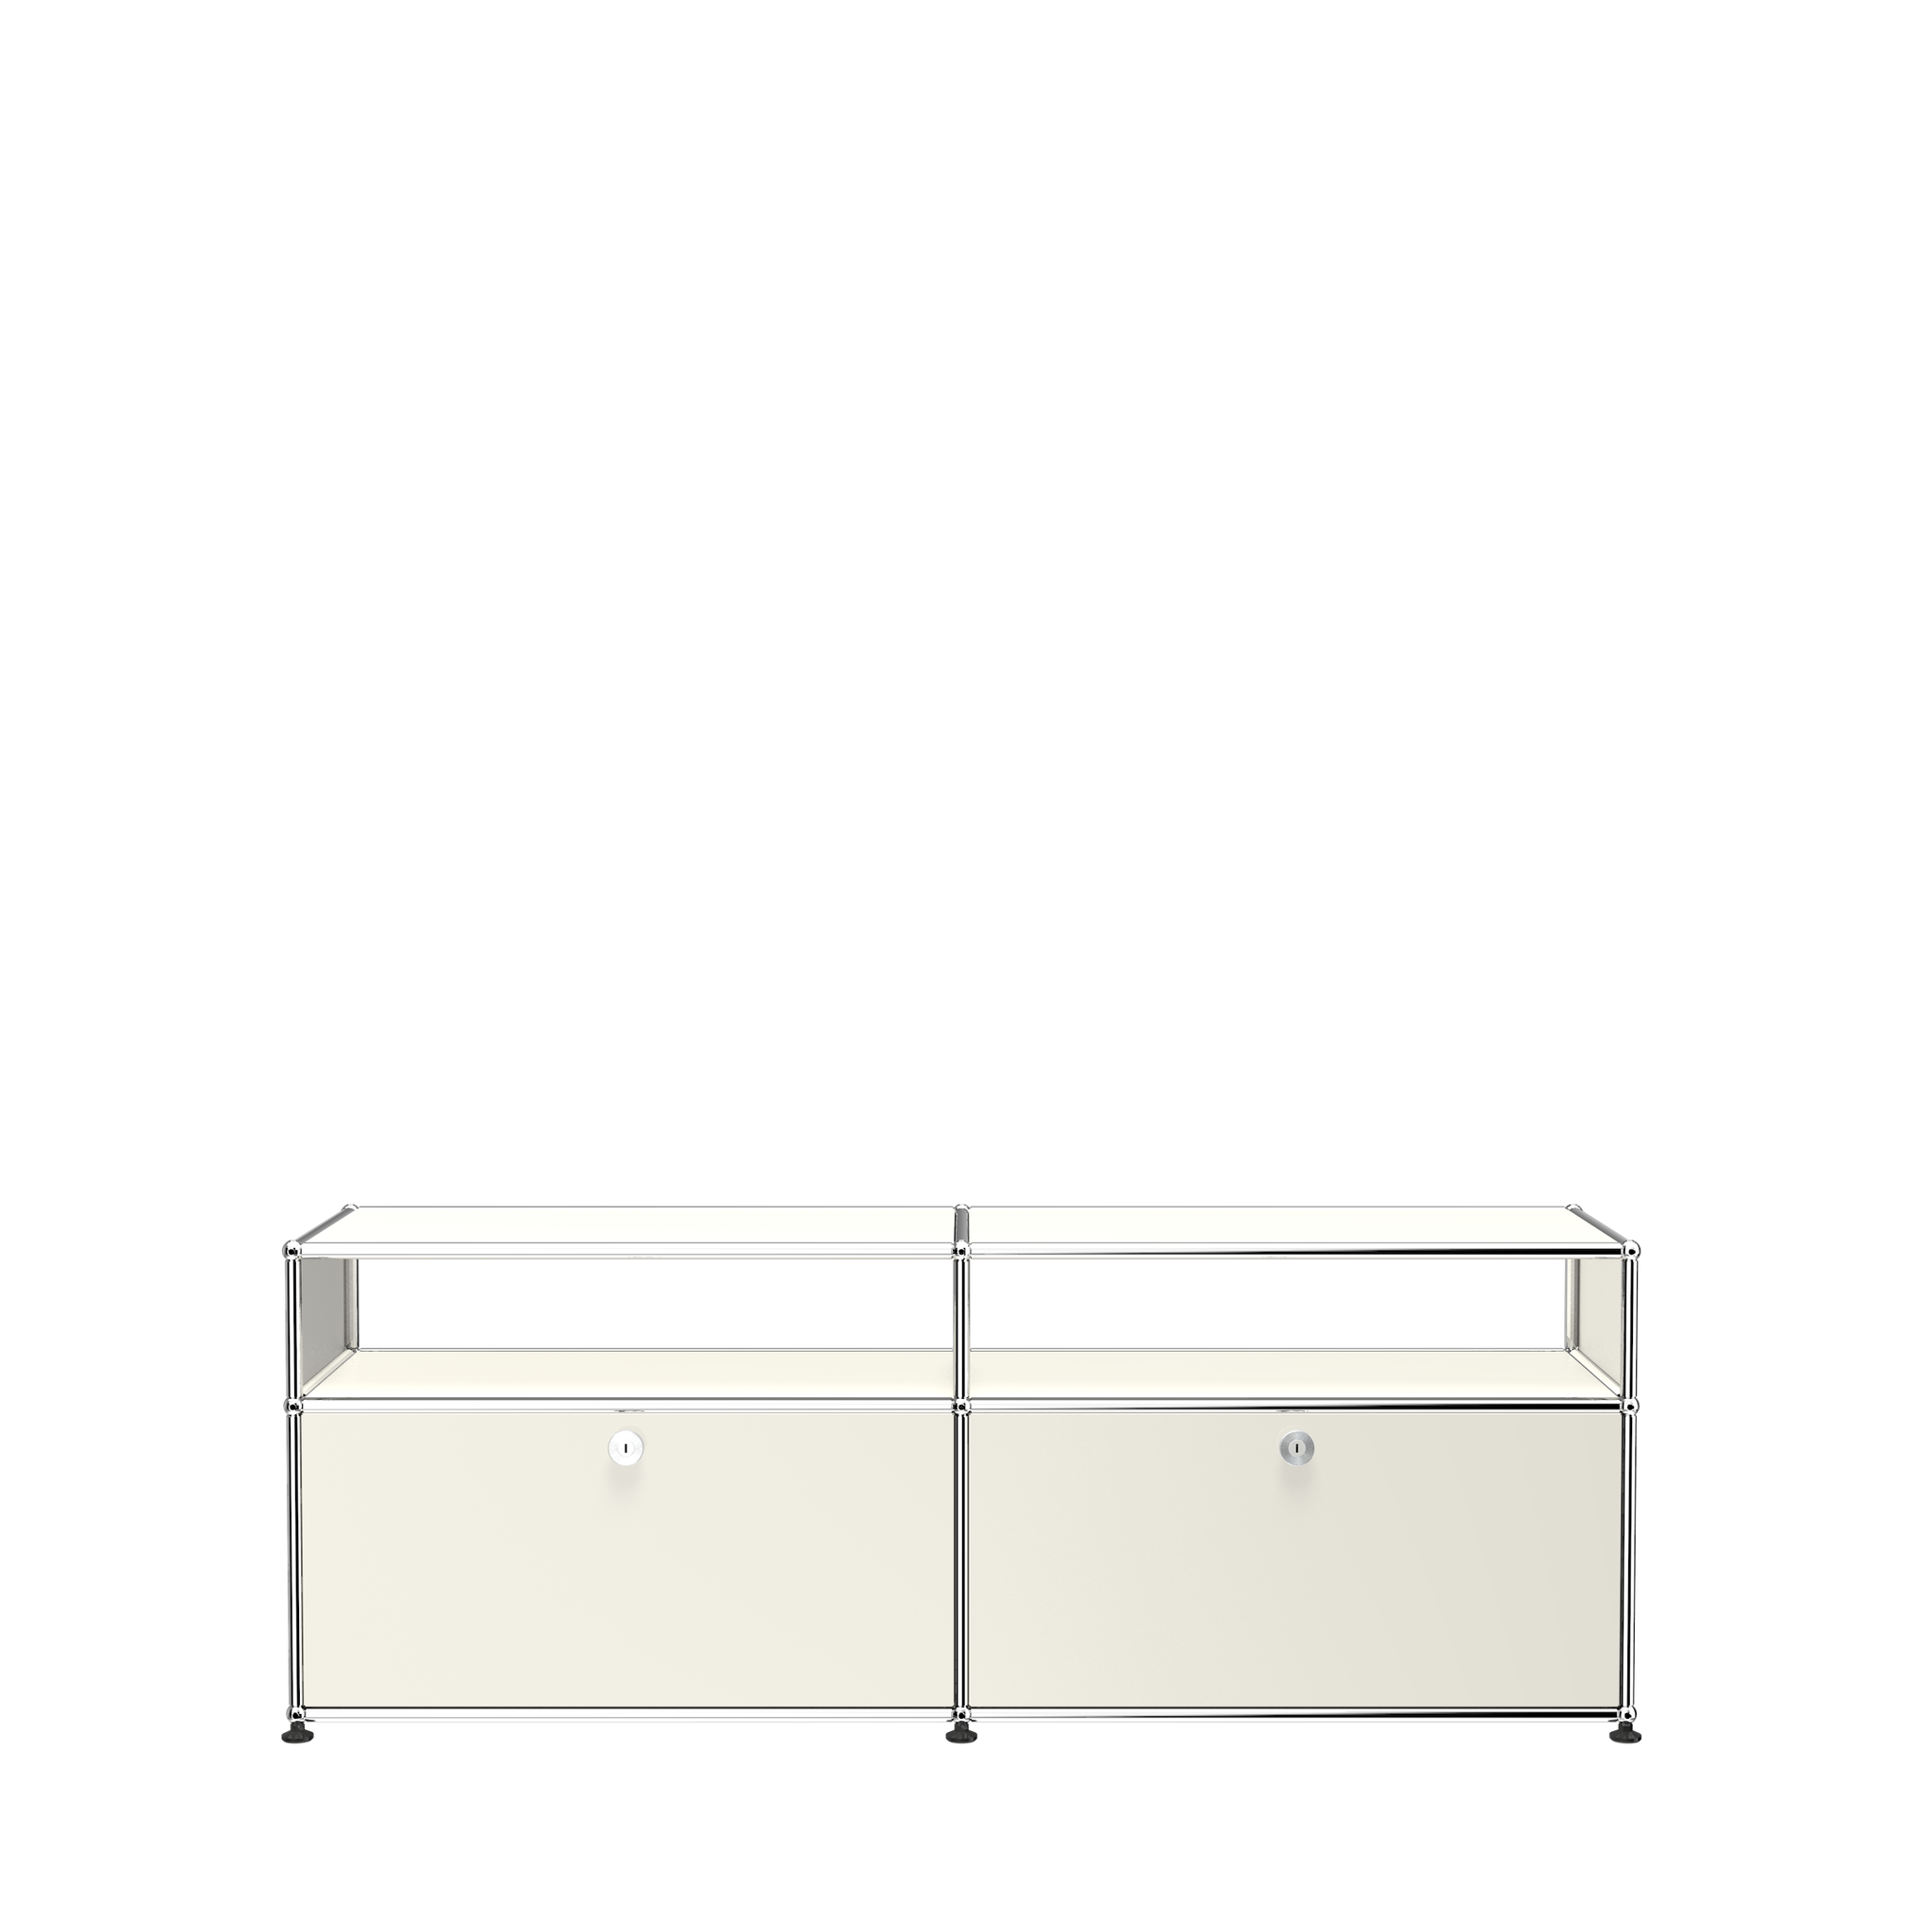 USM Haller Media Storage with Shelves (O2) in Pure White